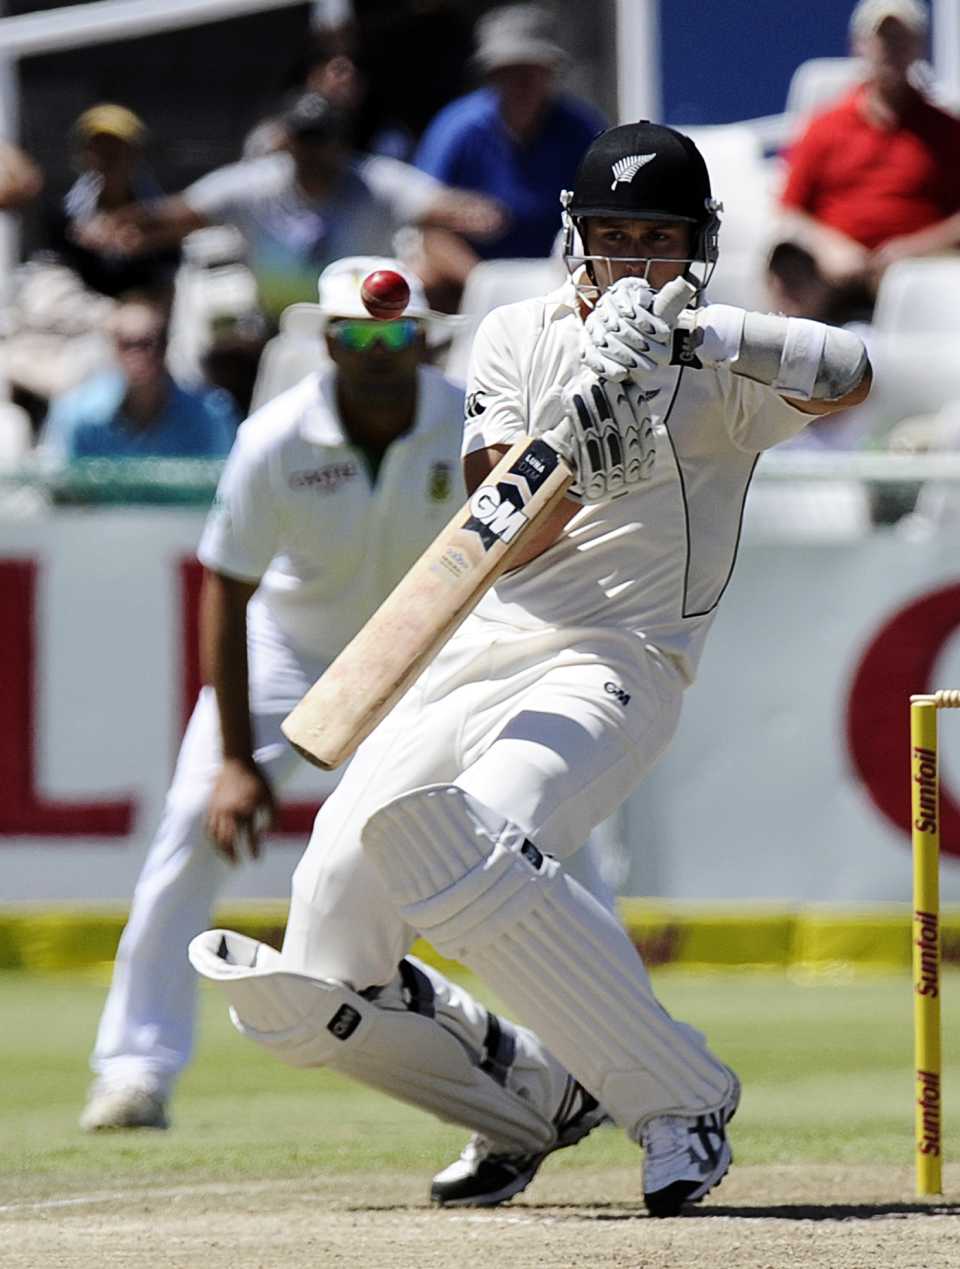 Trent Boult tries to avoid a short ball, 1st Test, South Africa v New Zealand, Cape Town, 3rd day, January 4, 2013